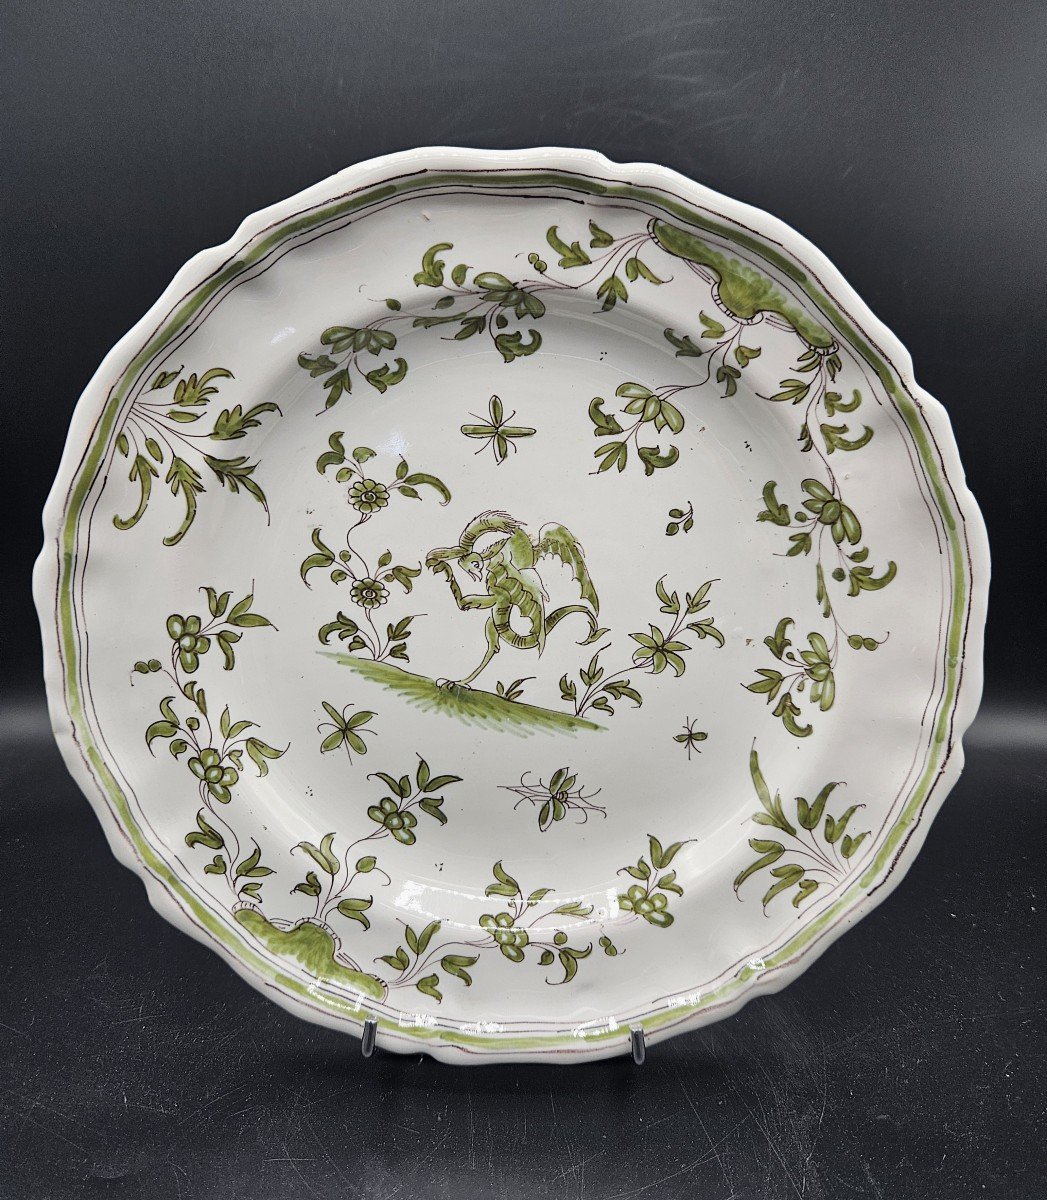 "18th Century Earthenware Plate From Moustiers"